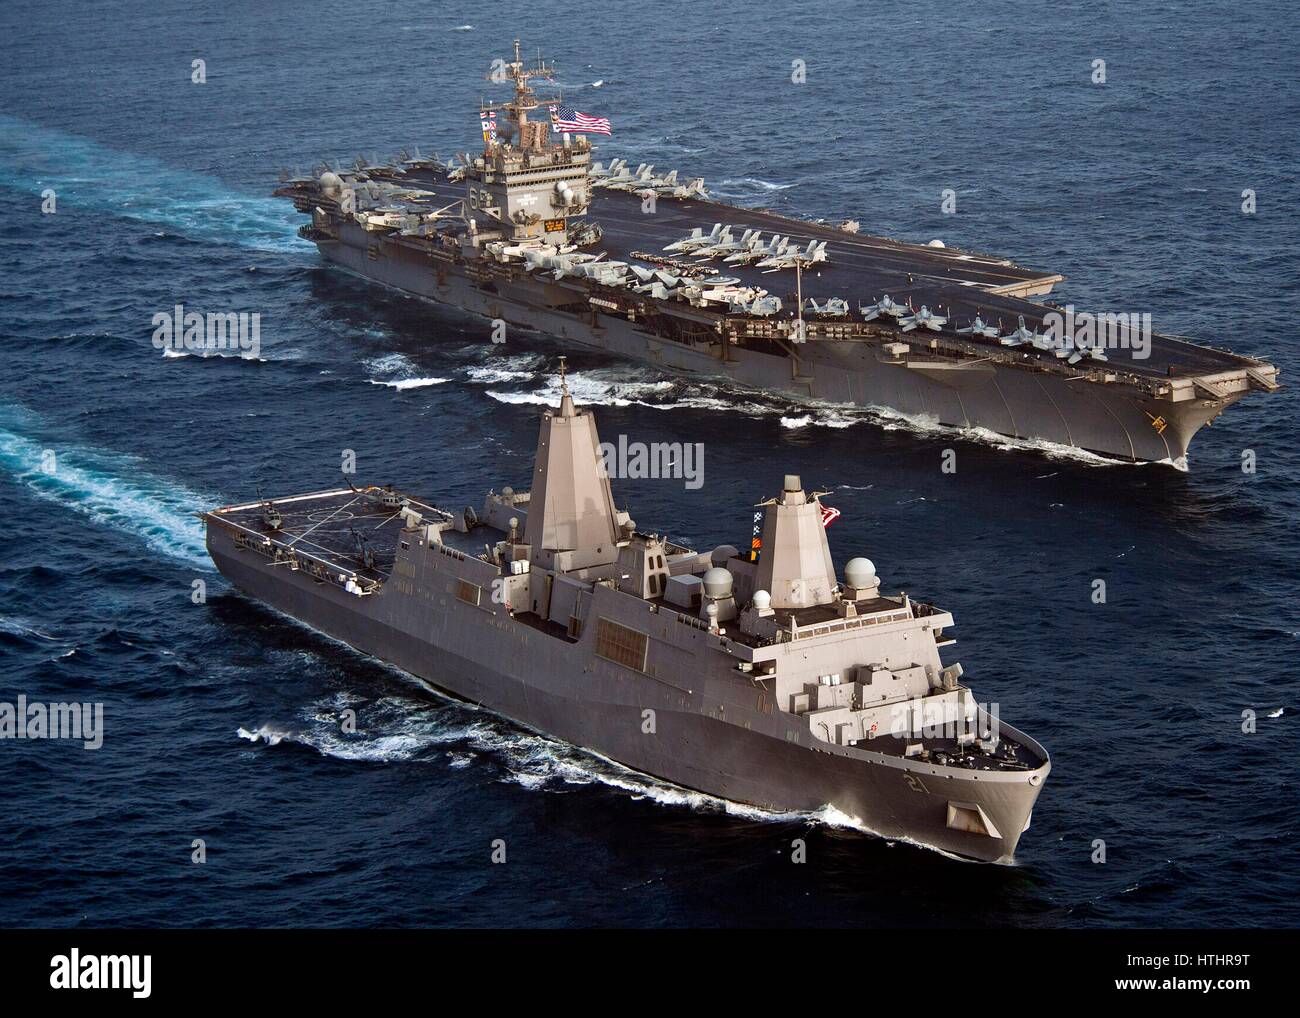 The USN San Antonio-class amphibious transport dock ship USS New York (left) steams in formation alongside the USN Nimitz-class aircraft carrier USS Enterprise June 9, 2012 in the Persian Gulf. Stock Photo